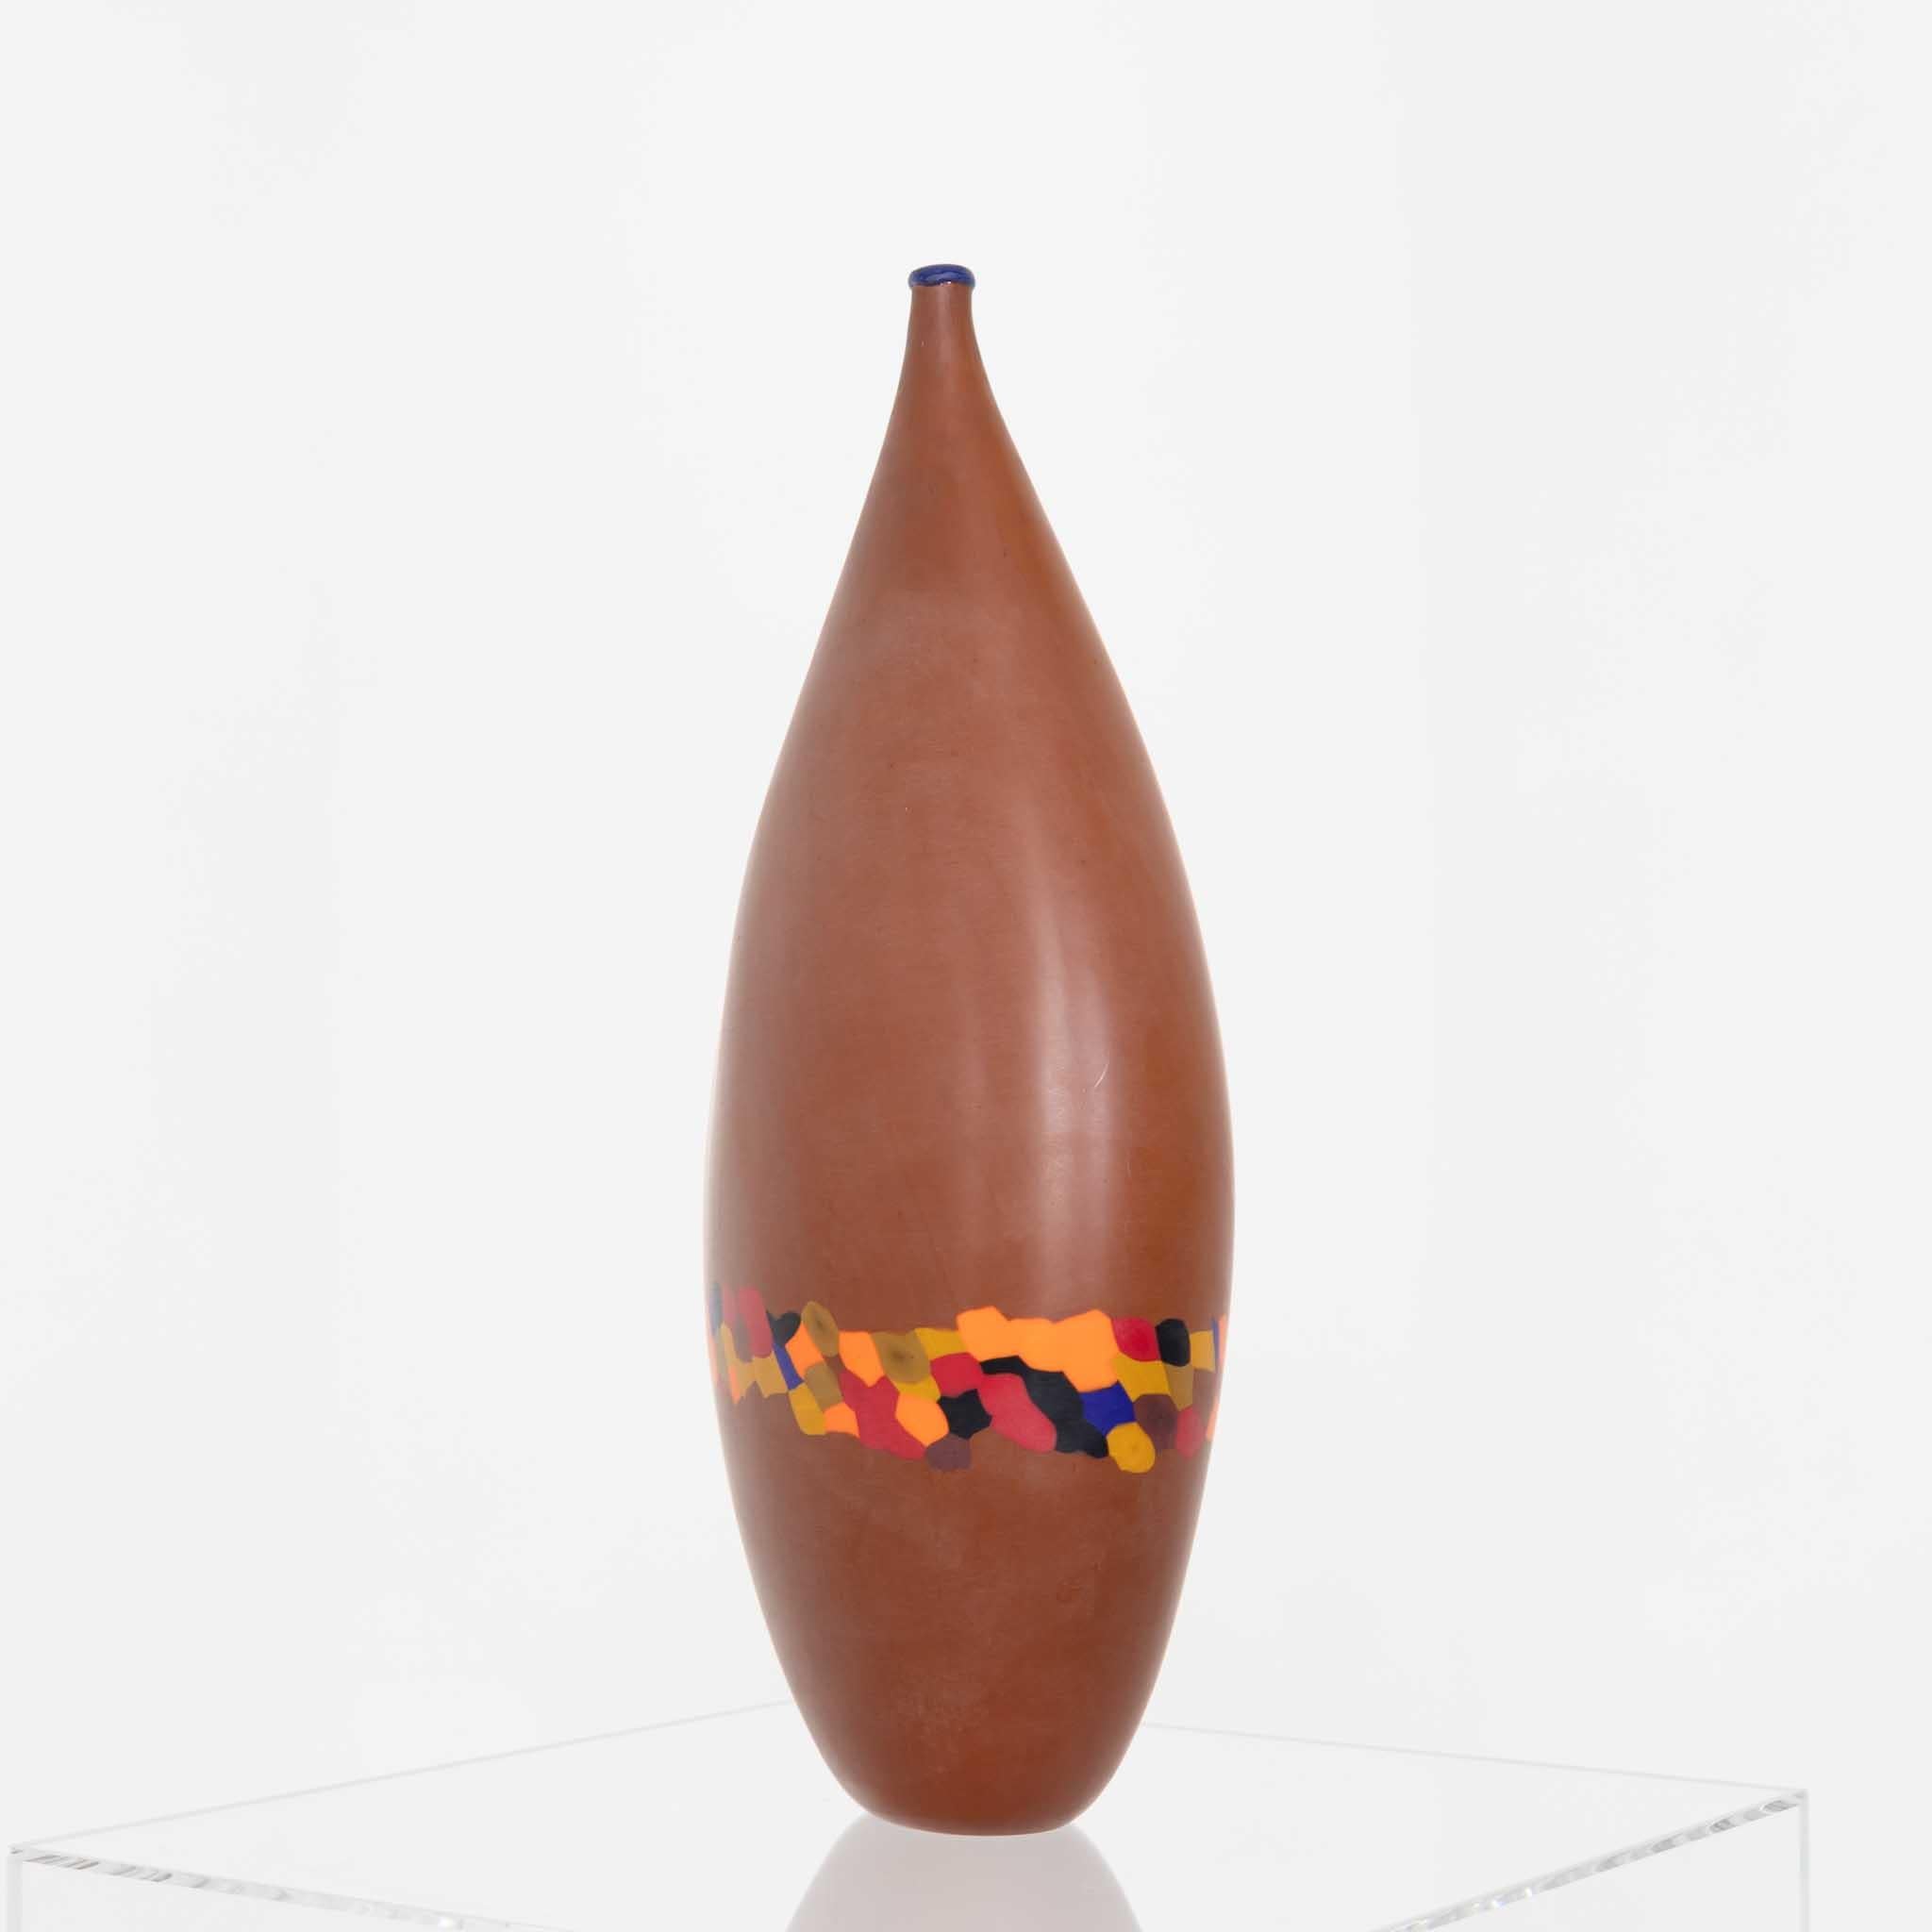 Murine Murano Art Glass Vase In Good Condition For Sale In New York, NY